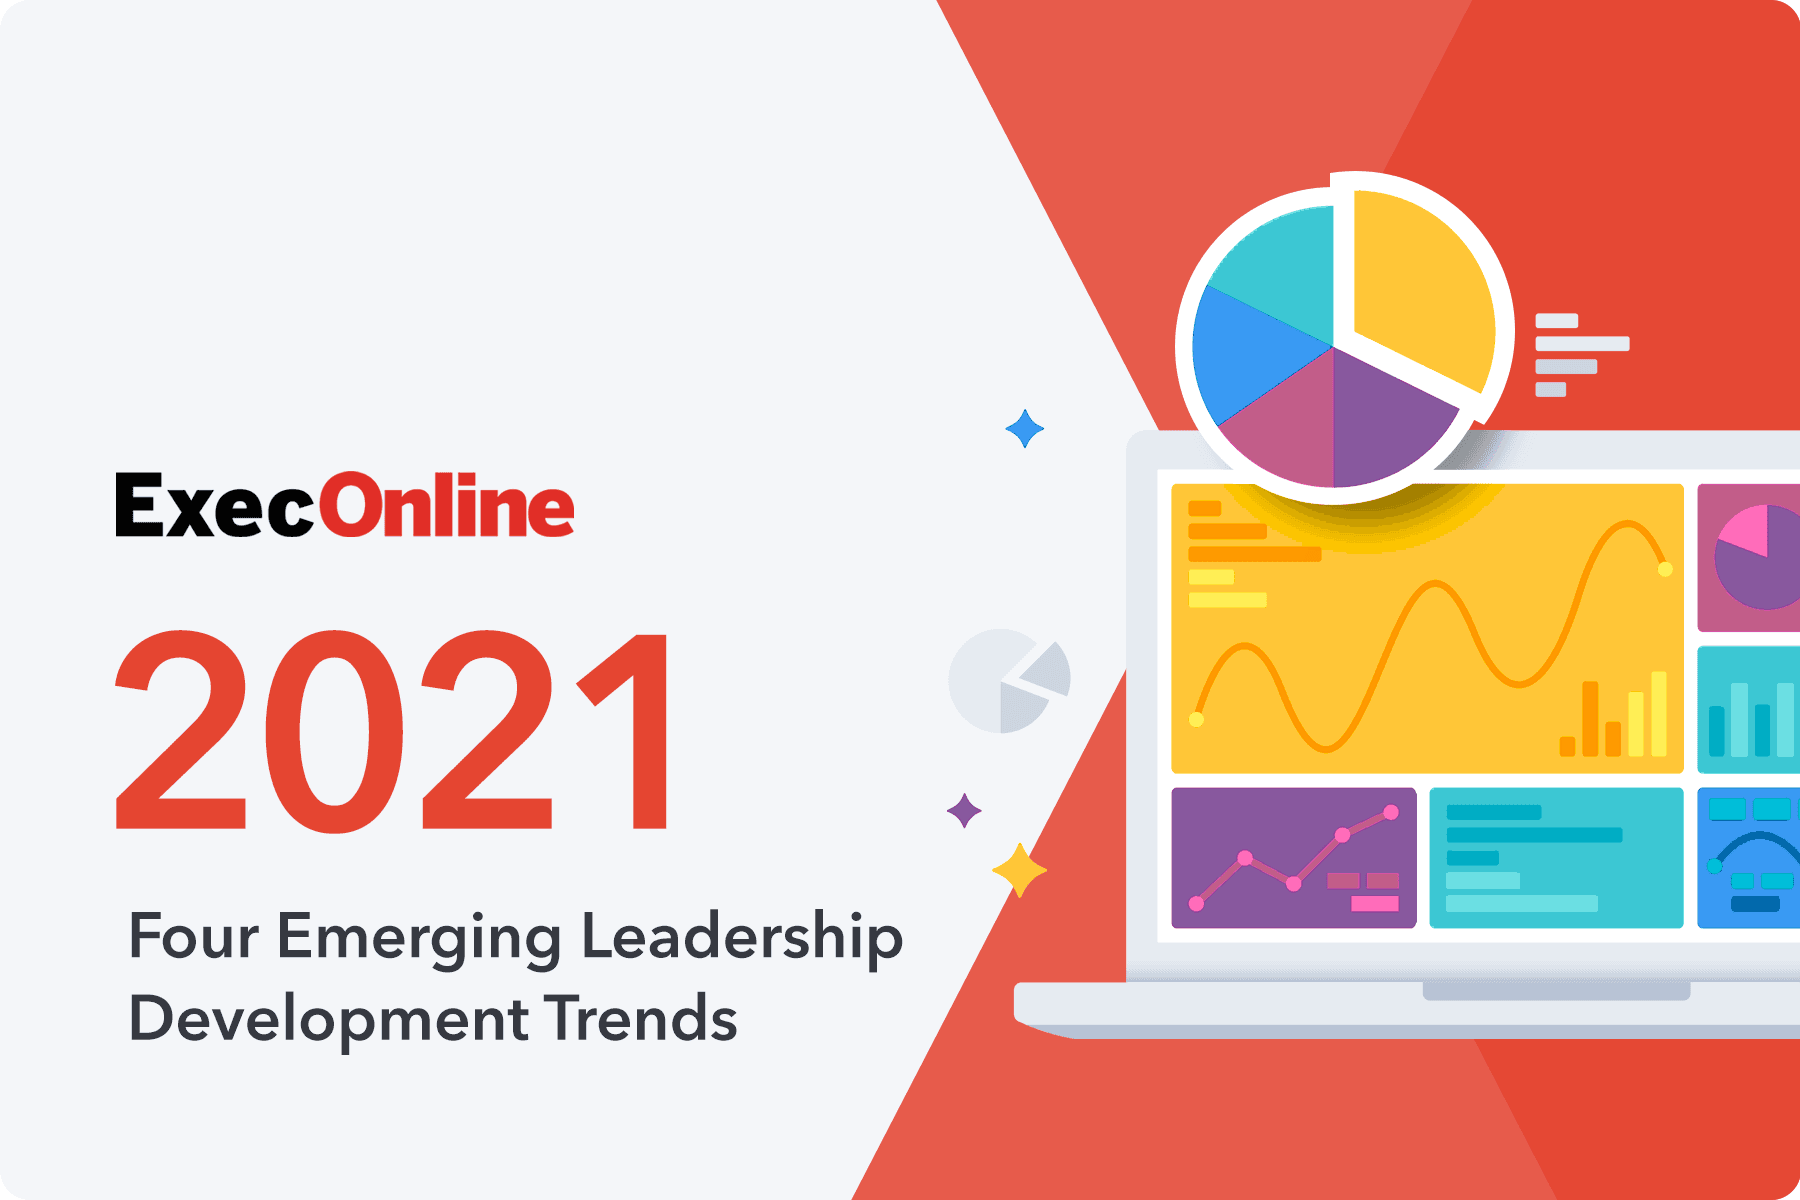 Product: Four Emerging Leadership Development Trends for 2021 - ExecOnline